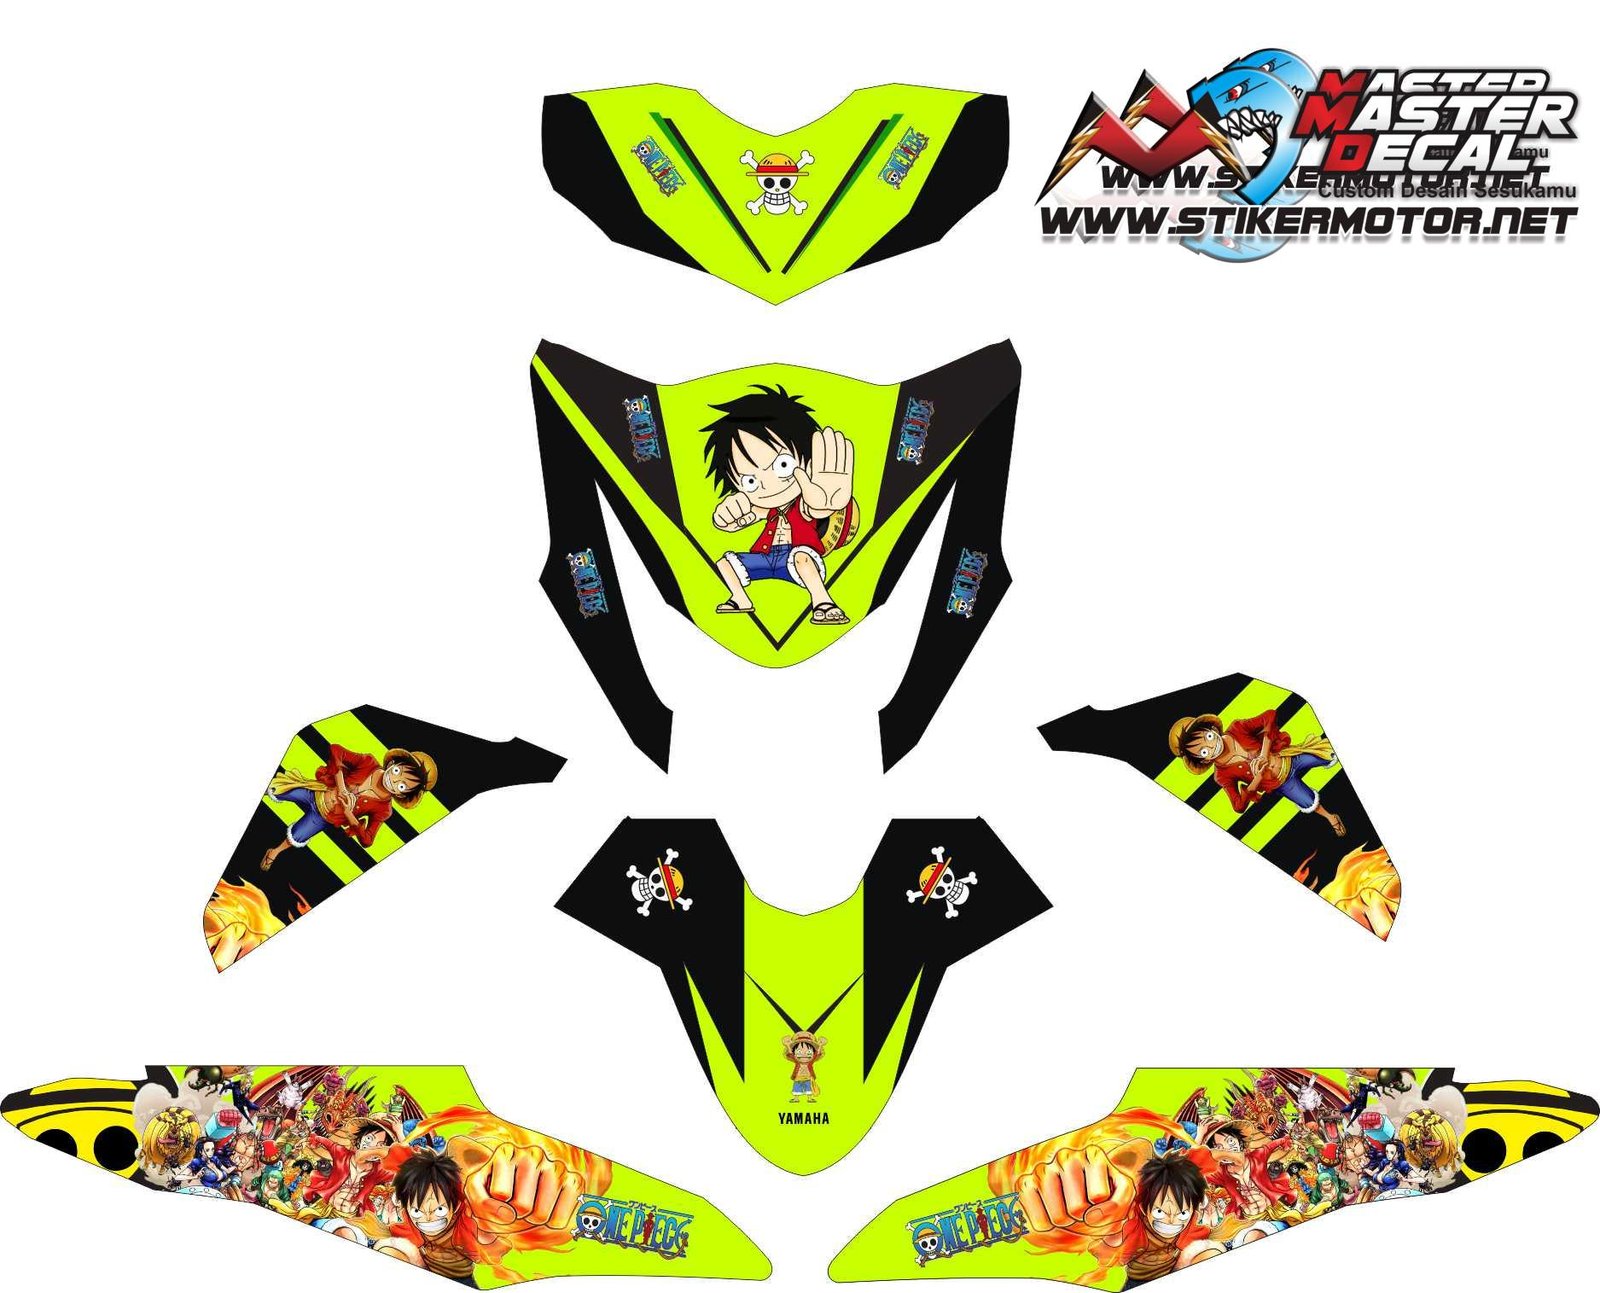 Decal Motor Beat Manchaster United Stikermotor Net Customize Without Limit